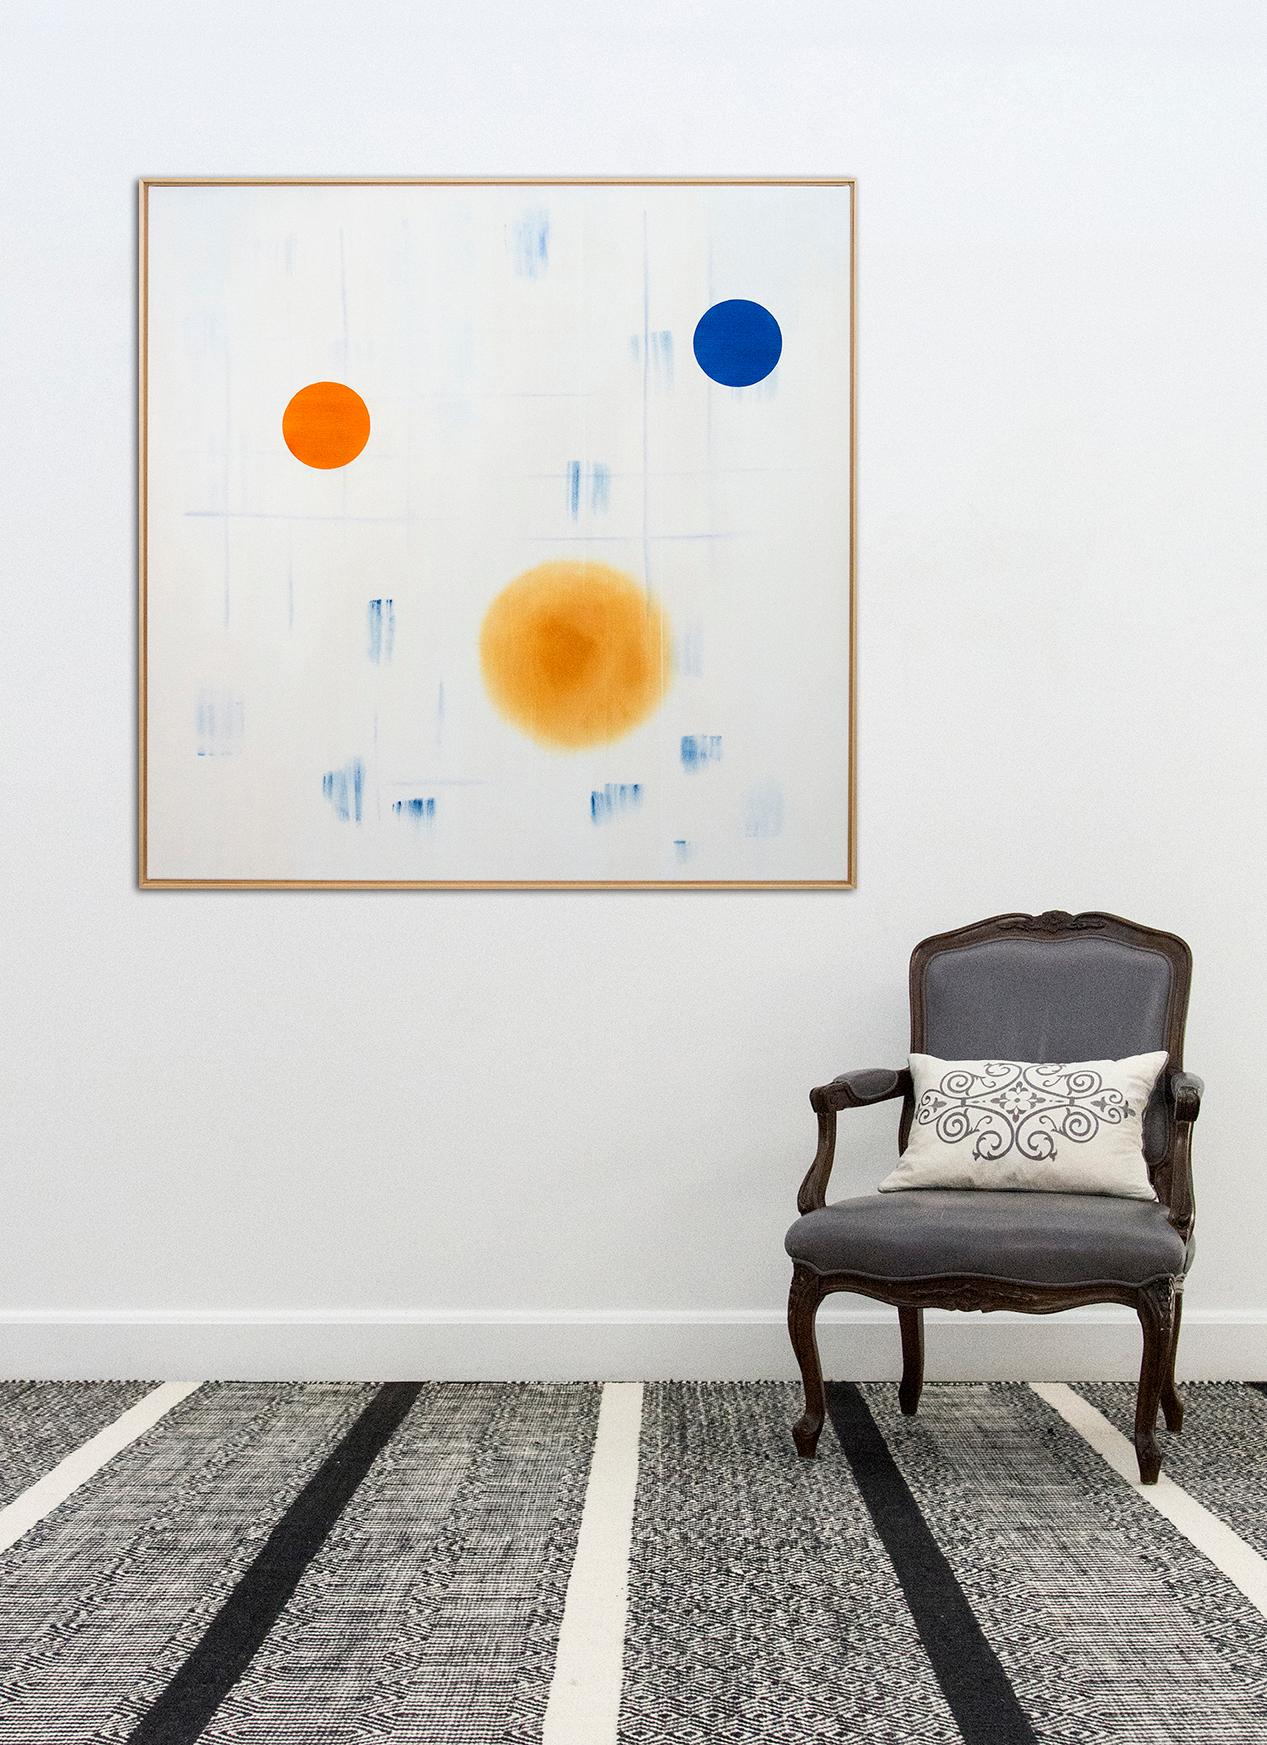 Ristvedt explores the emotional potential of color and form -- spheres of orange and sapphire blue float on a pale ground. A grid of light blue reasserts the nature of the picture plane in this masterful composition. 

Milly Ristvedt (b. 1942,